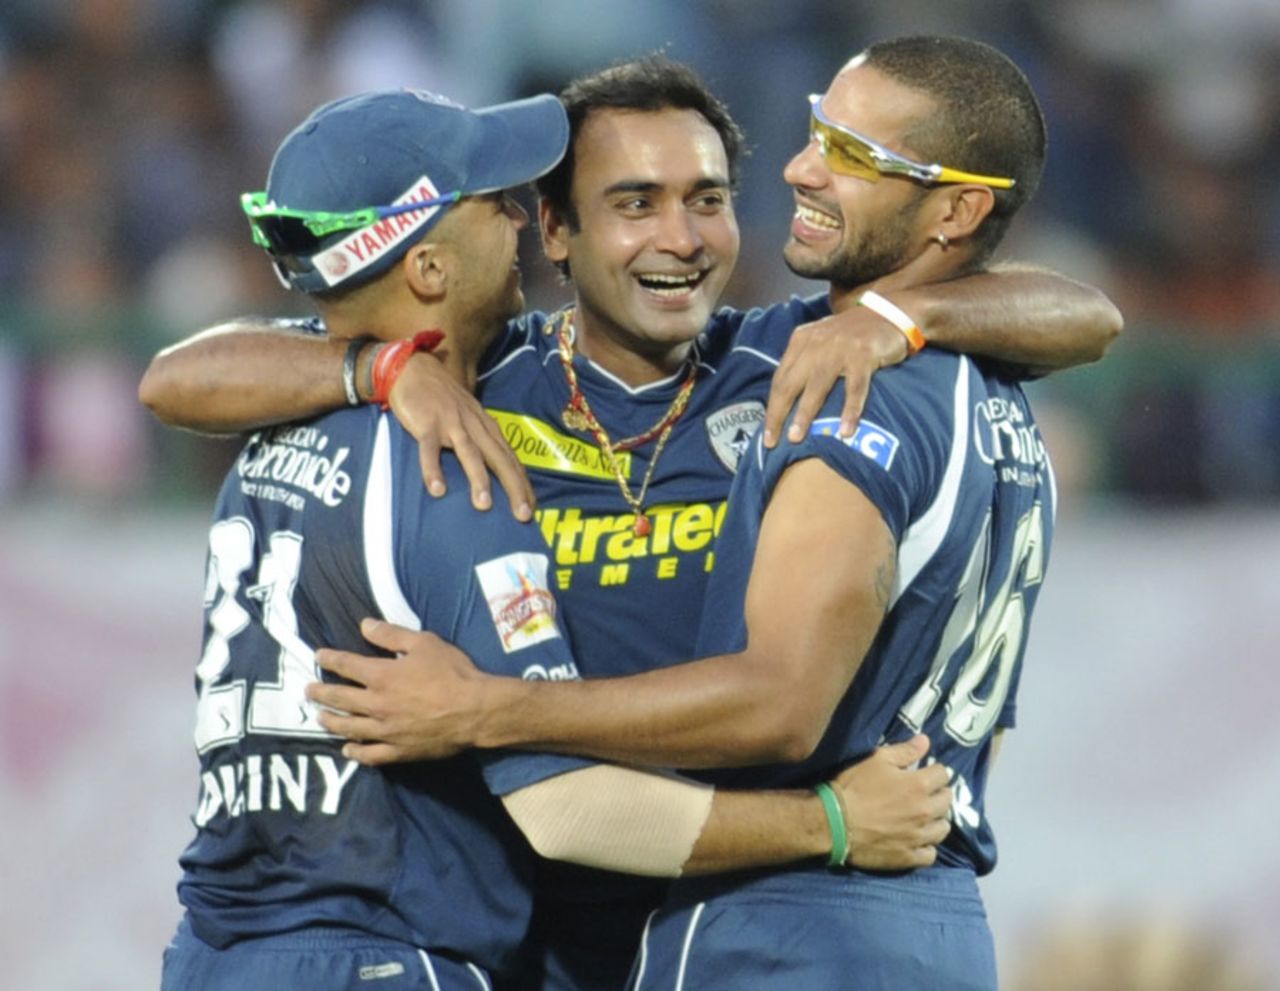 Deccan Chargers celebrate winning their final league match, Kings XI Punjab v Deccan Chargers, IPL 2011, Dharamsala, May 21, 2011